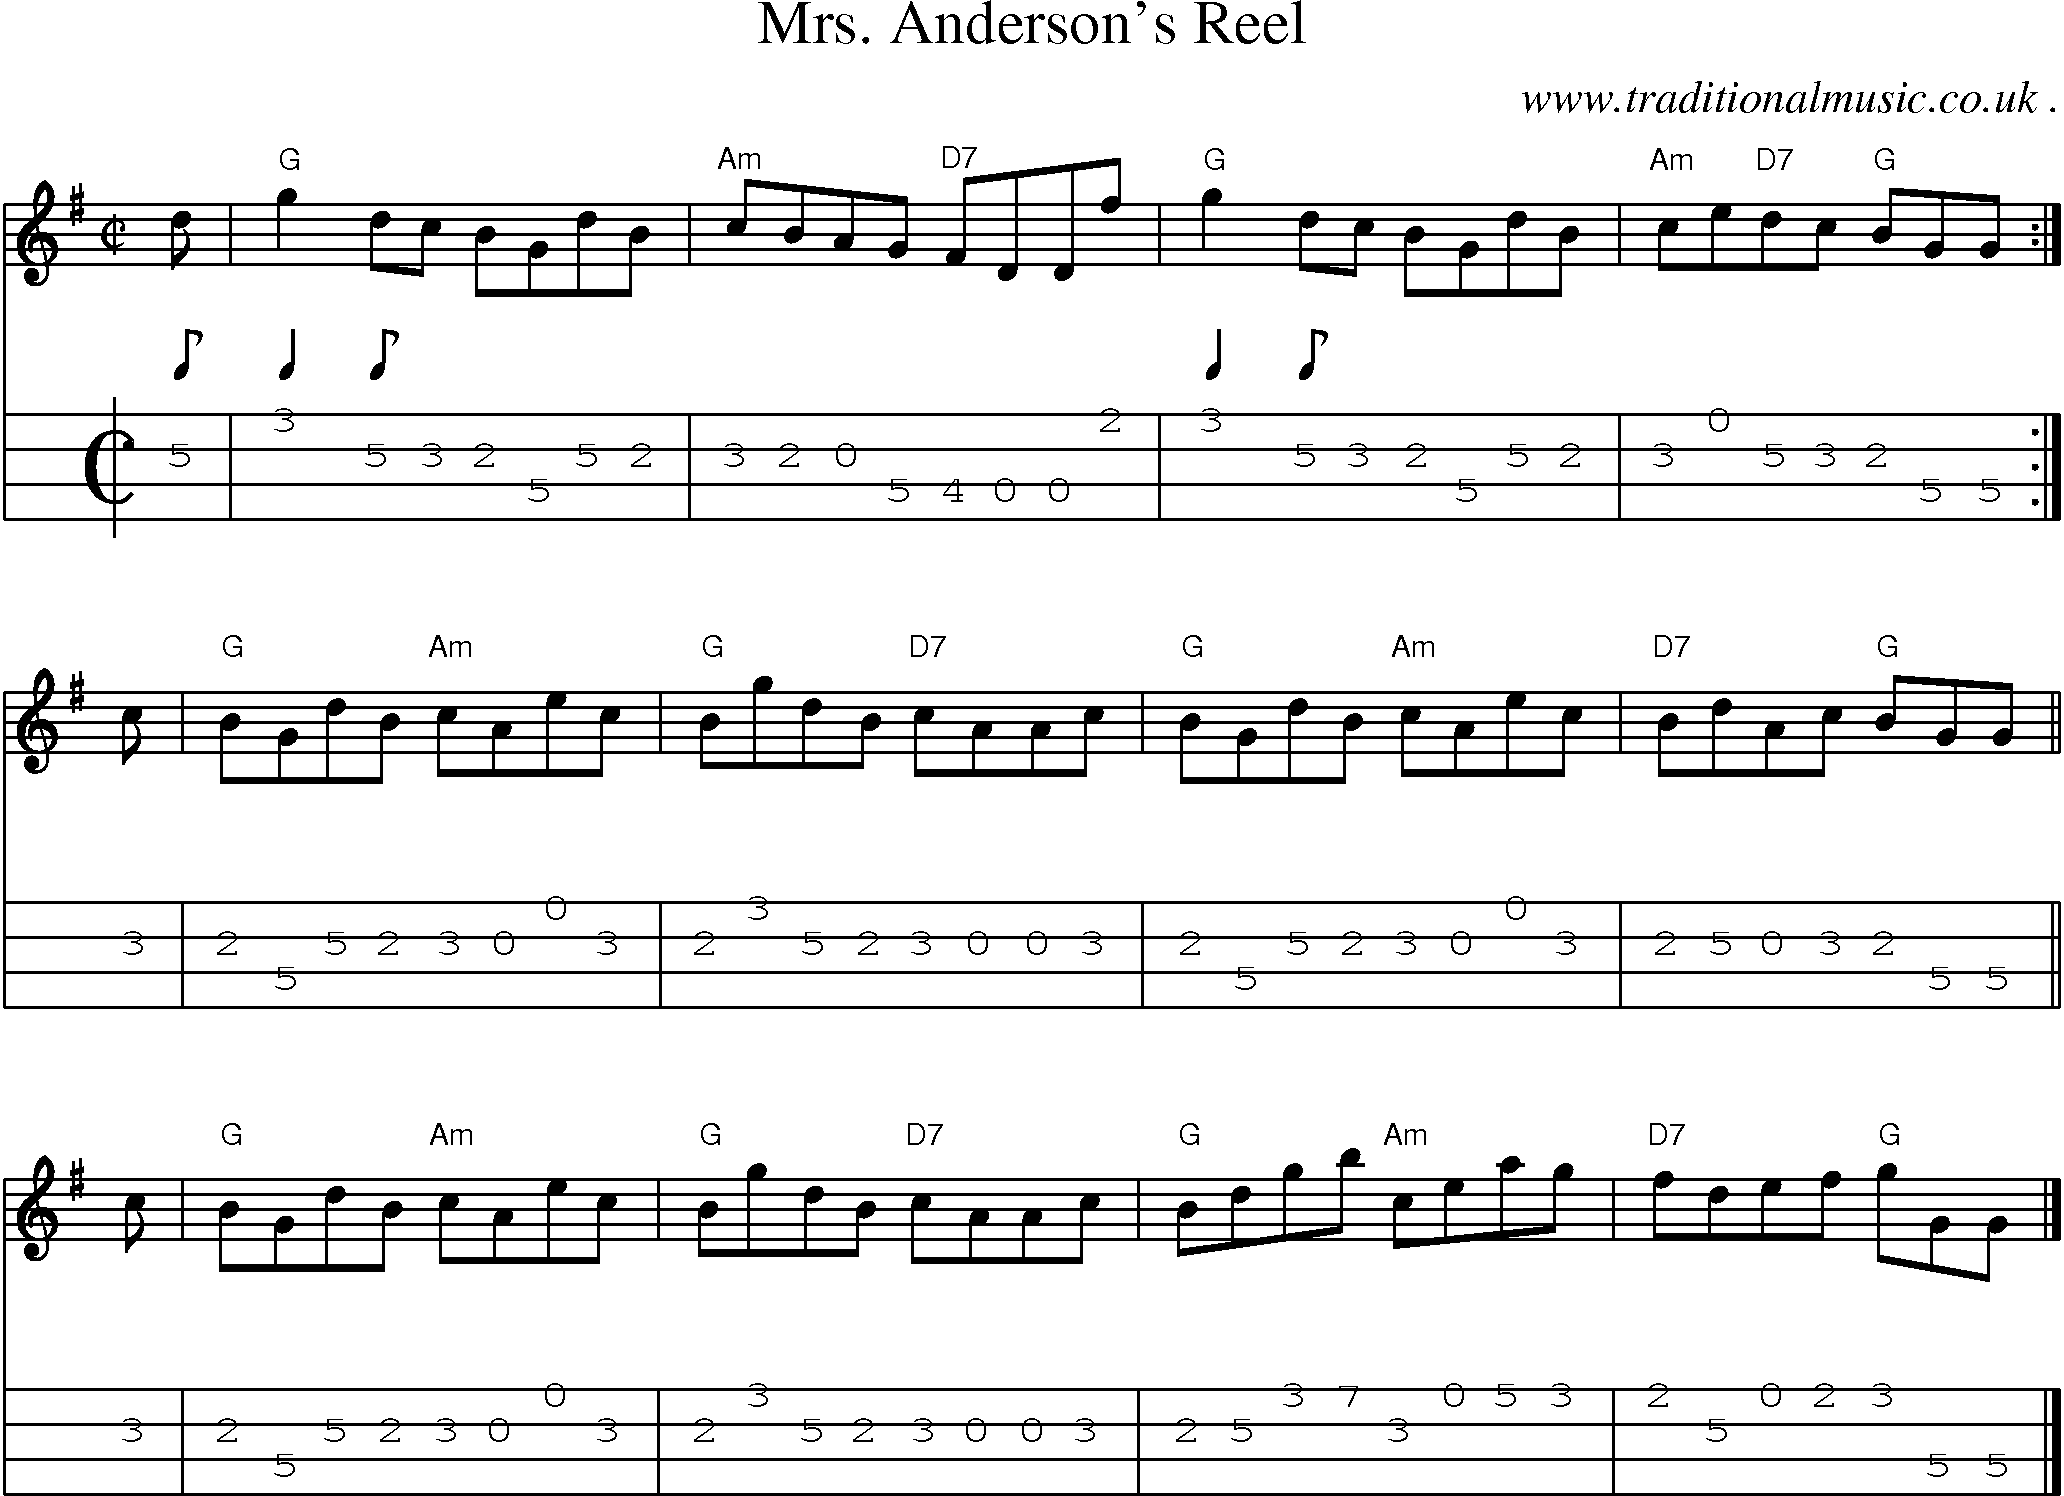 Sheet-music  score, Chords and Mandolin Tabs for Mrs Andersons Reel